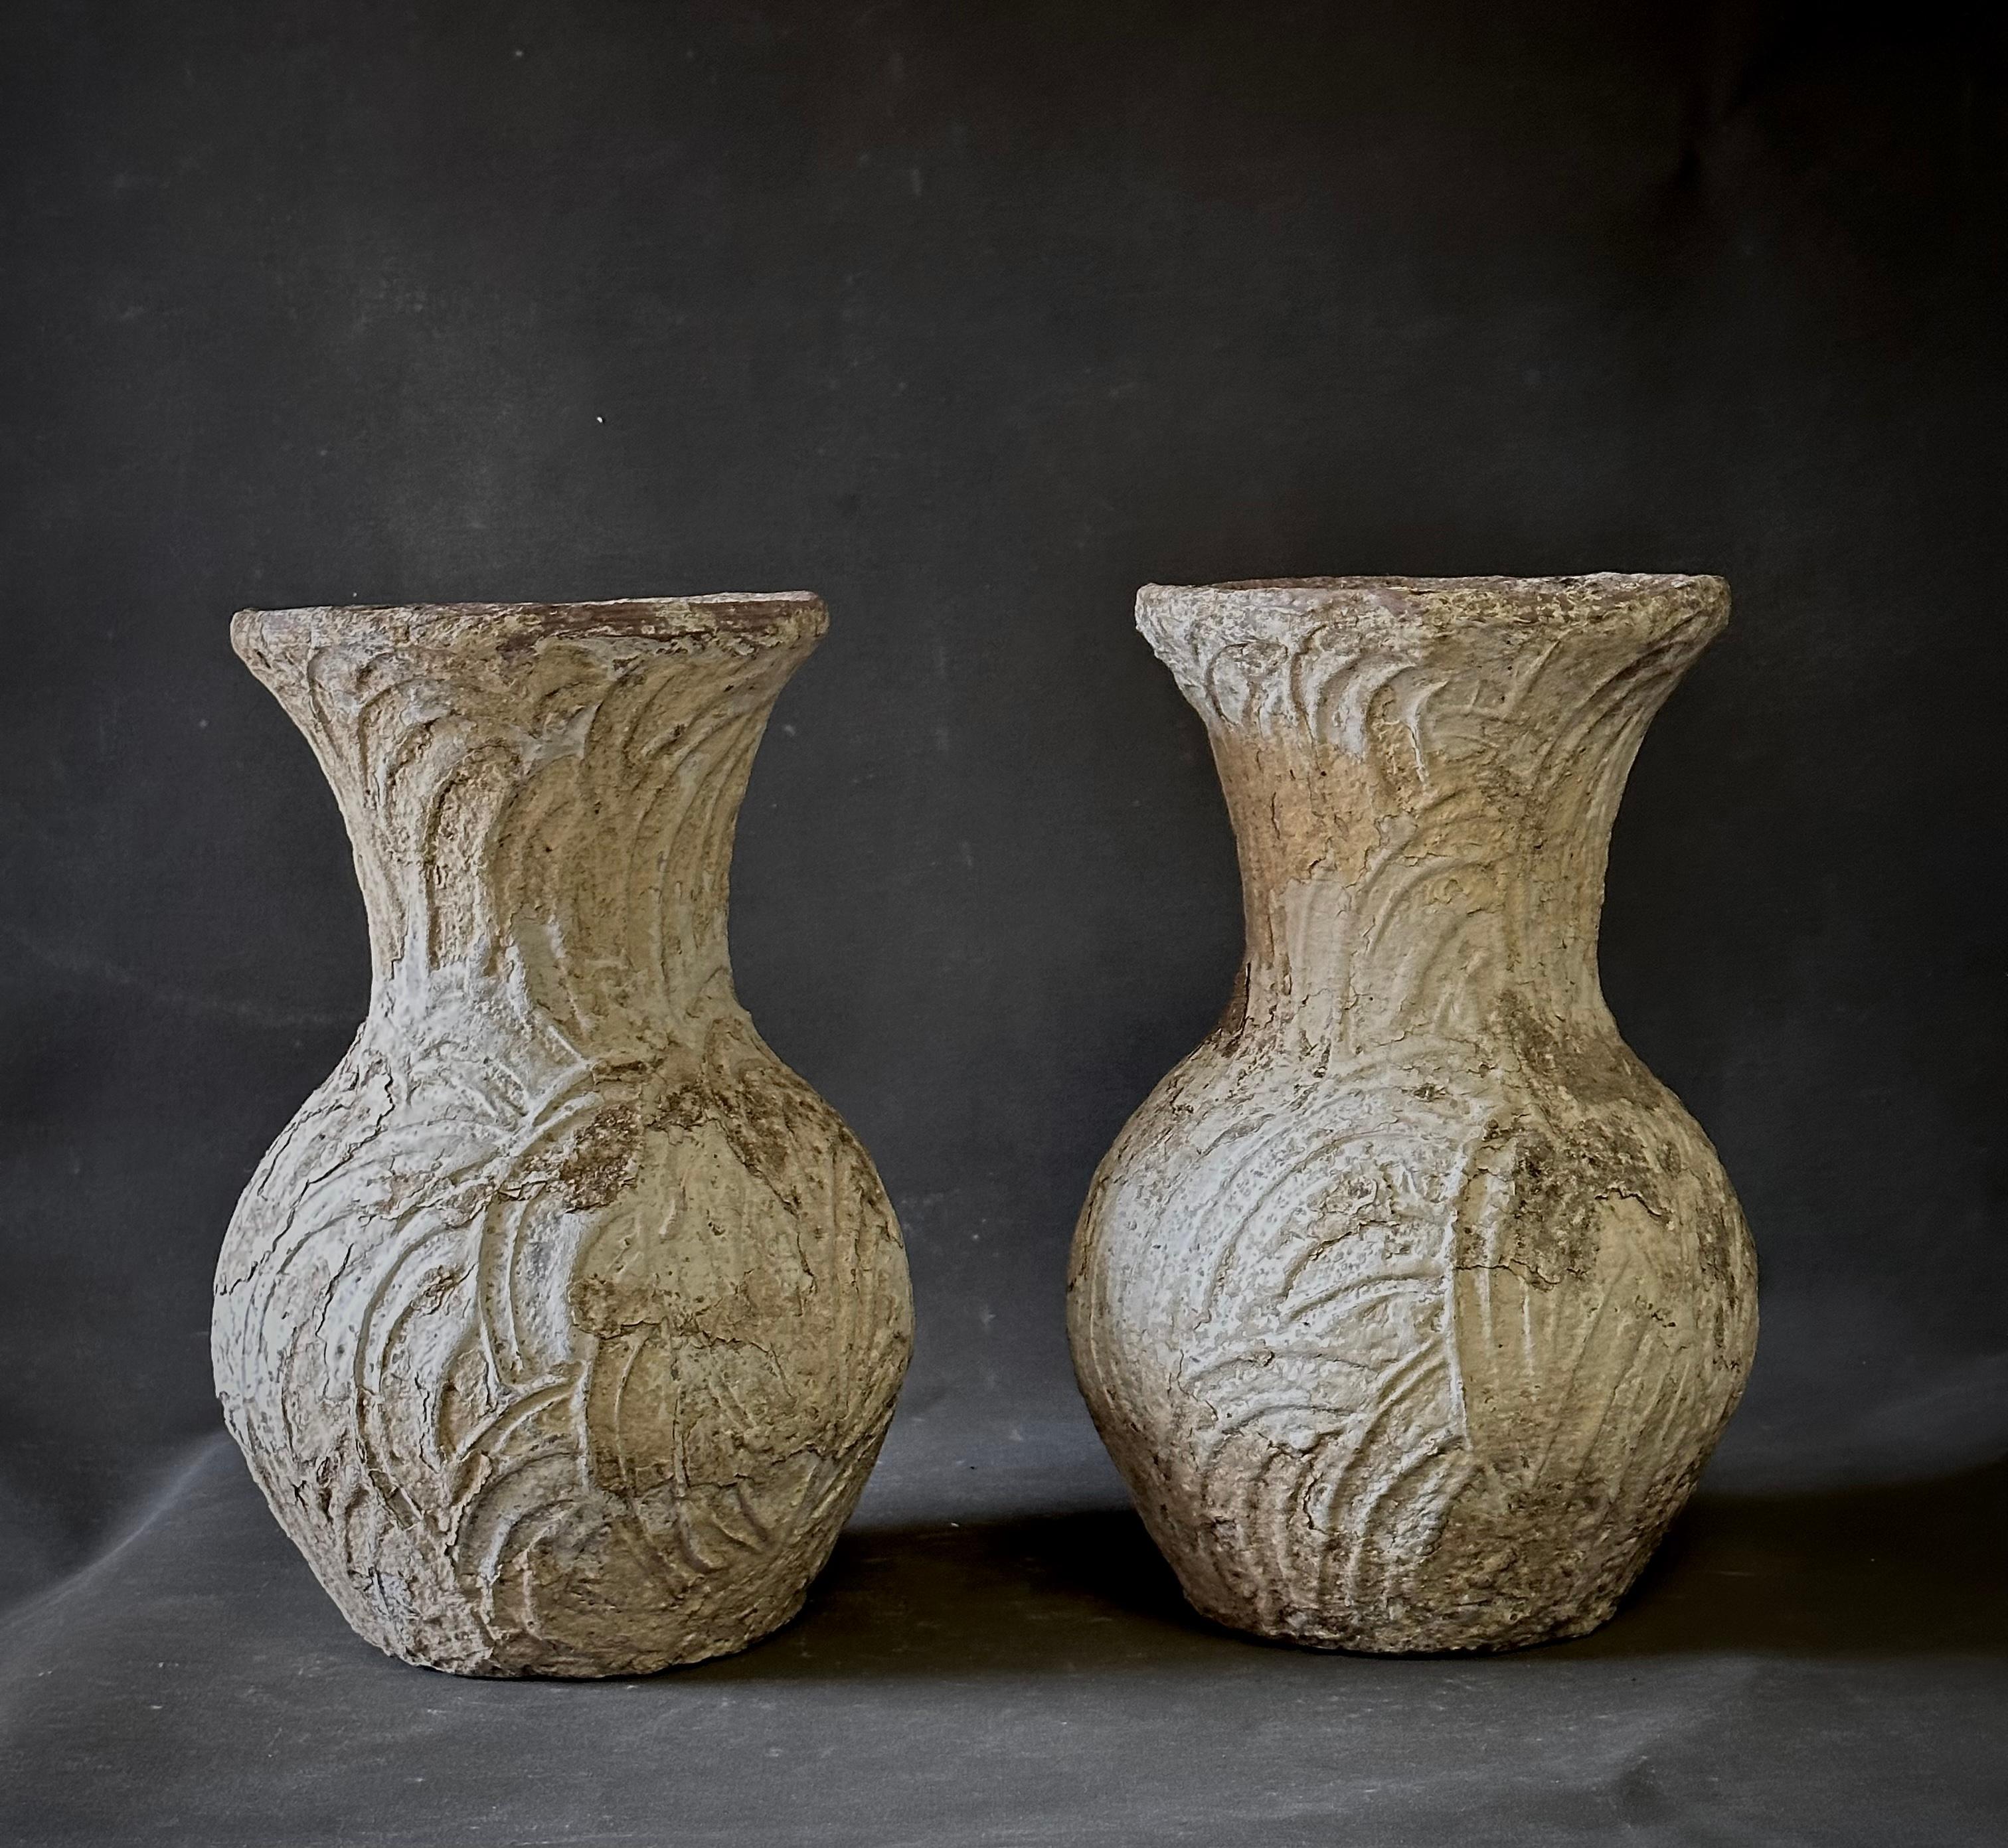 Pair of concrete pots from 1940s France. Great for both indoor and outdoor use, the mottled, chalky surface texture and hand-worn shape adds a touch of rustic elegance to any living space. 

France, circa 1940

Dimensions: 11W x 11D x 17.5H